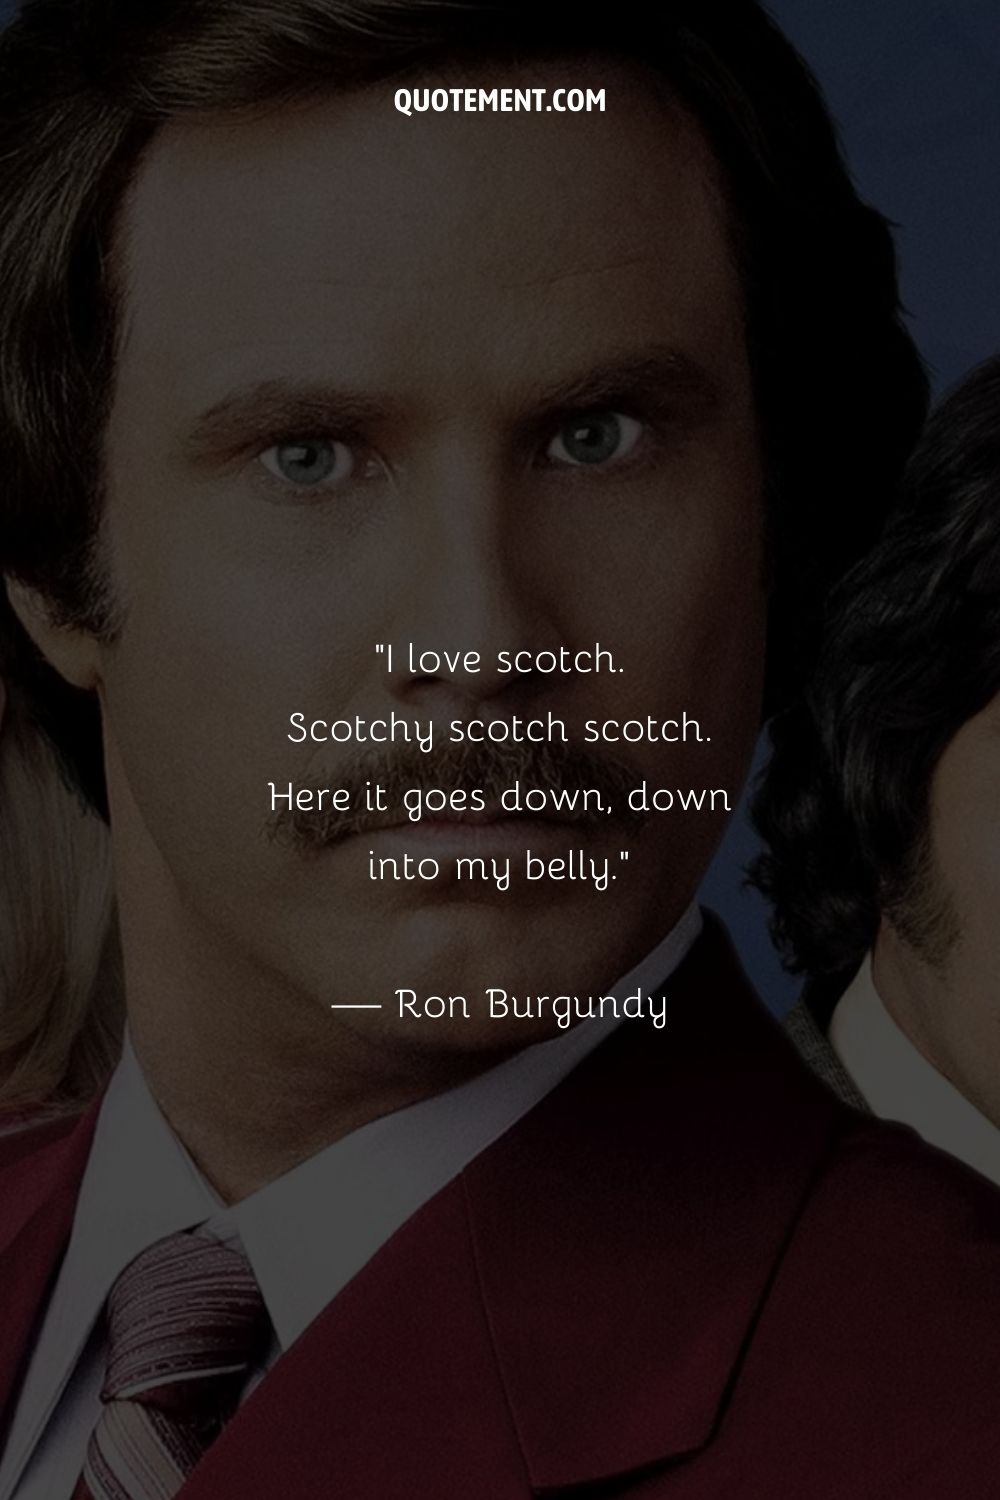 Iconic Ron Burgundy quote about scotch.